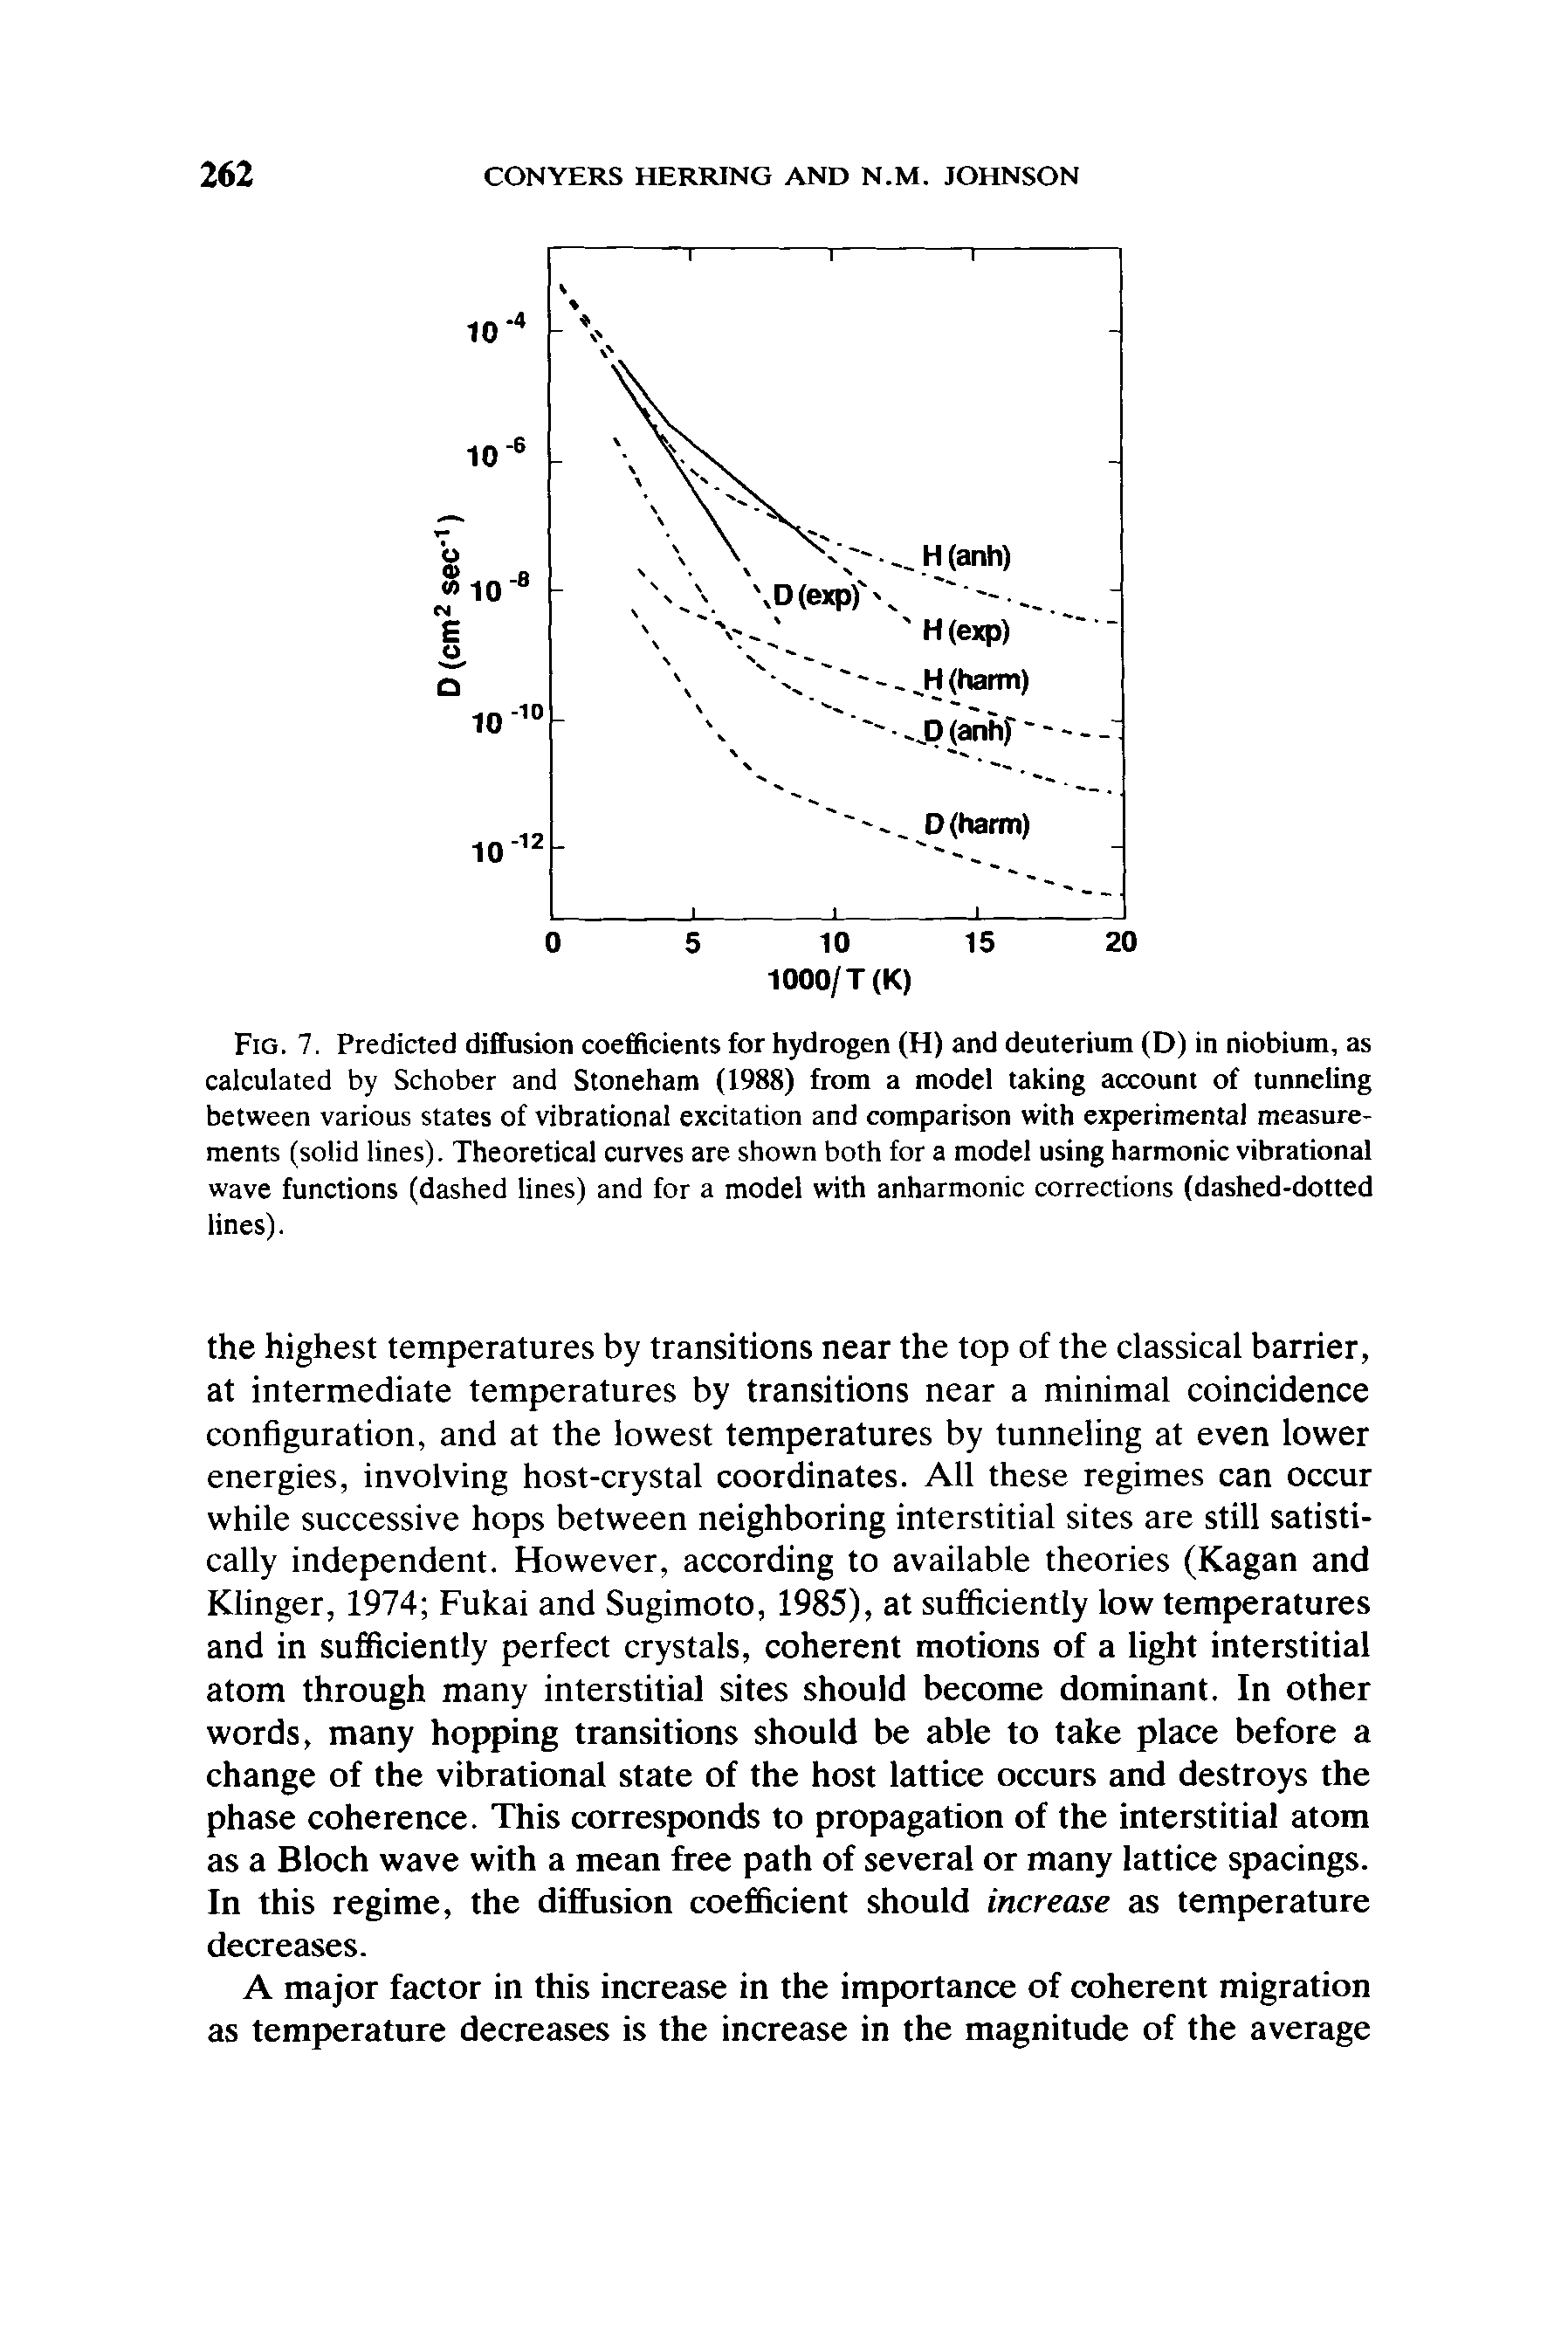 Fig. 7. Predicted diffusion coefficients for hydrogen (H) and deuterium (D) in niobium, as calculated by Schober and Stoneham (1988) from a model taking account of tunneling between various states of vibrational excitation and comparison with experimental measurements (solid lines). Theoretical curves are shown both for a model using harmonic vibrational wave functions (dashed lines) and for a model with anharmonic corrections (dashed-dotted lines).